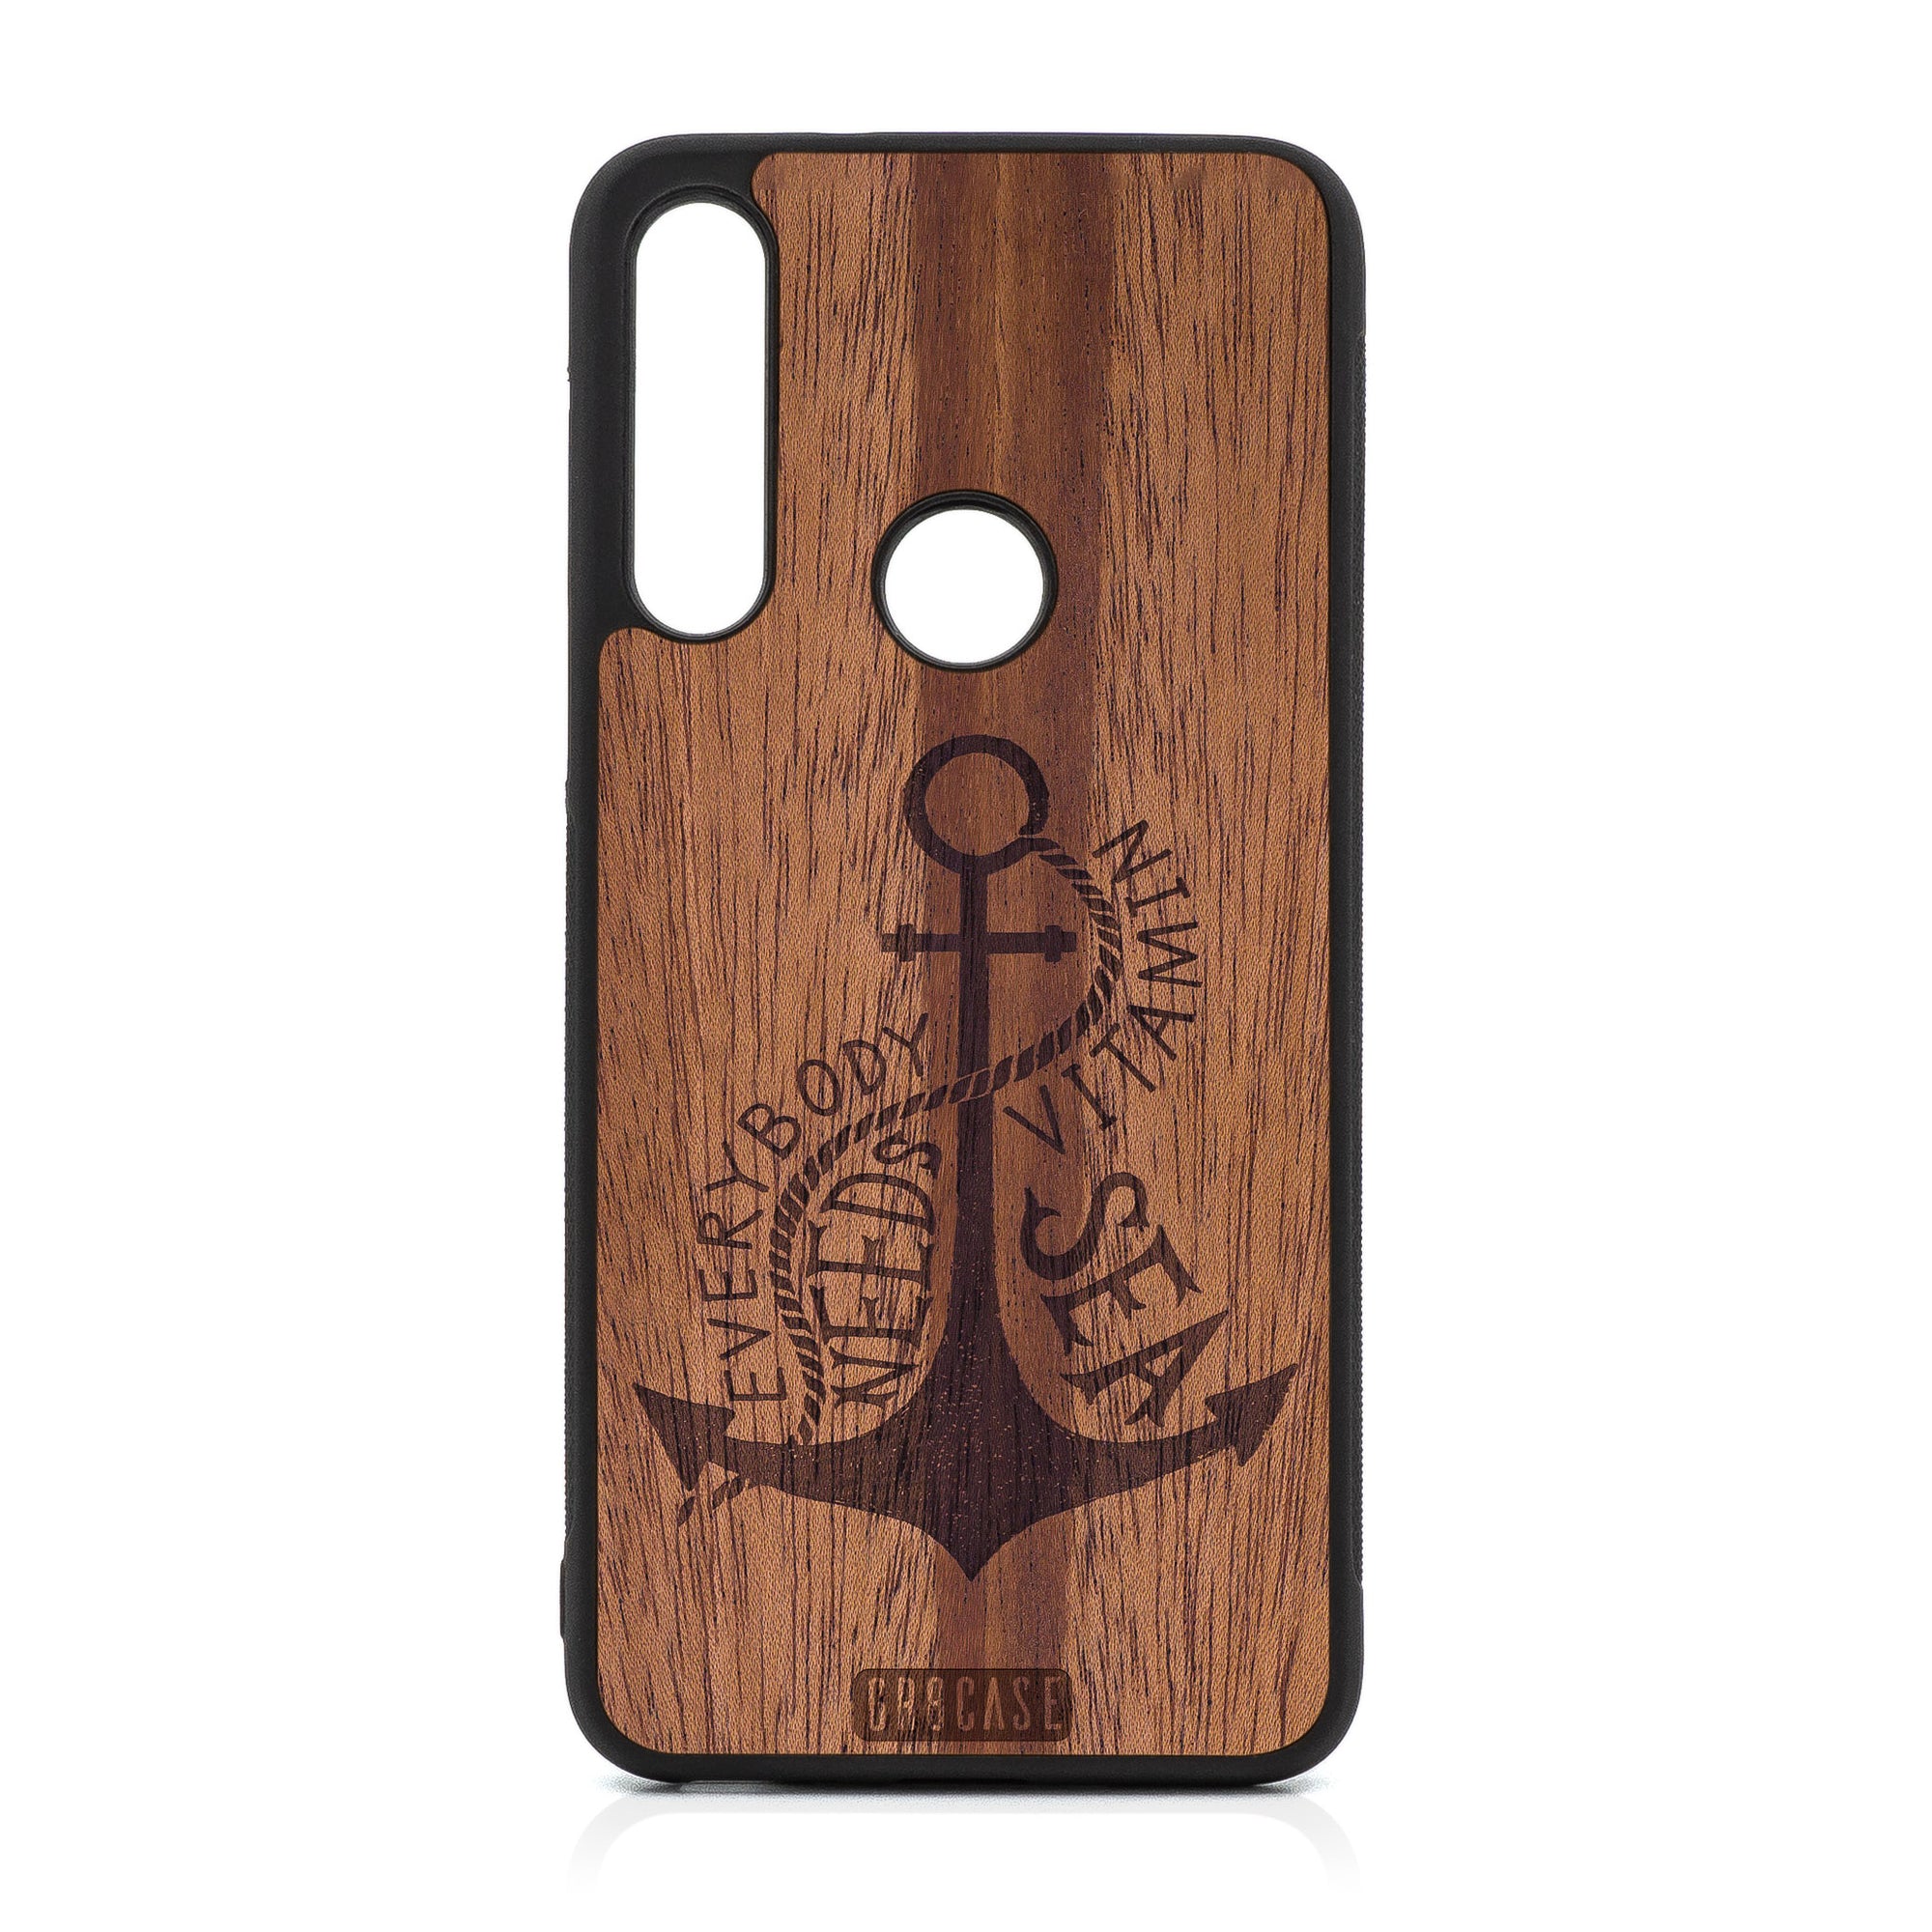 Everybody Needs Vitamin Sea (Anchor) Design Wood Case For Moto G Fast